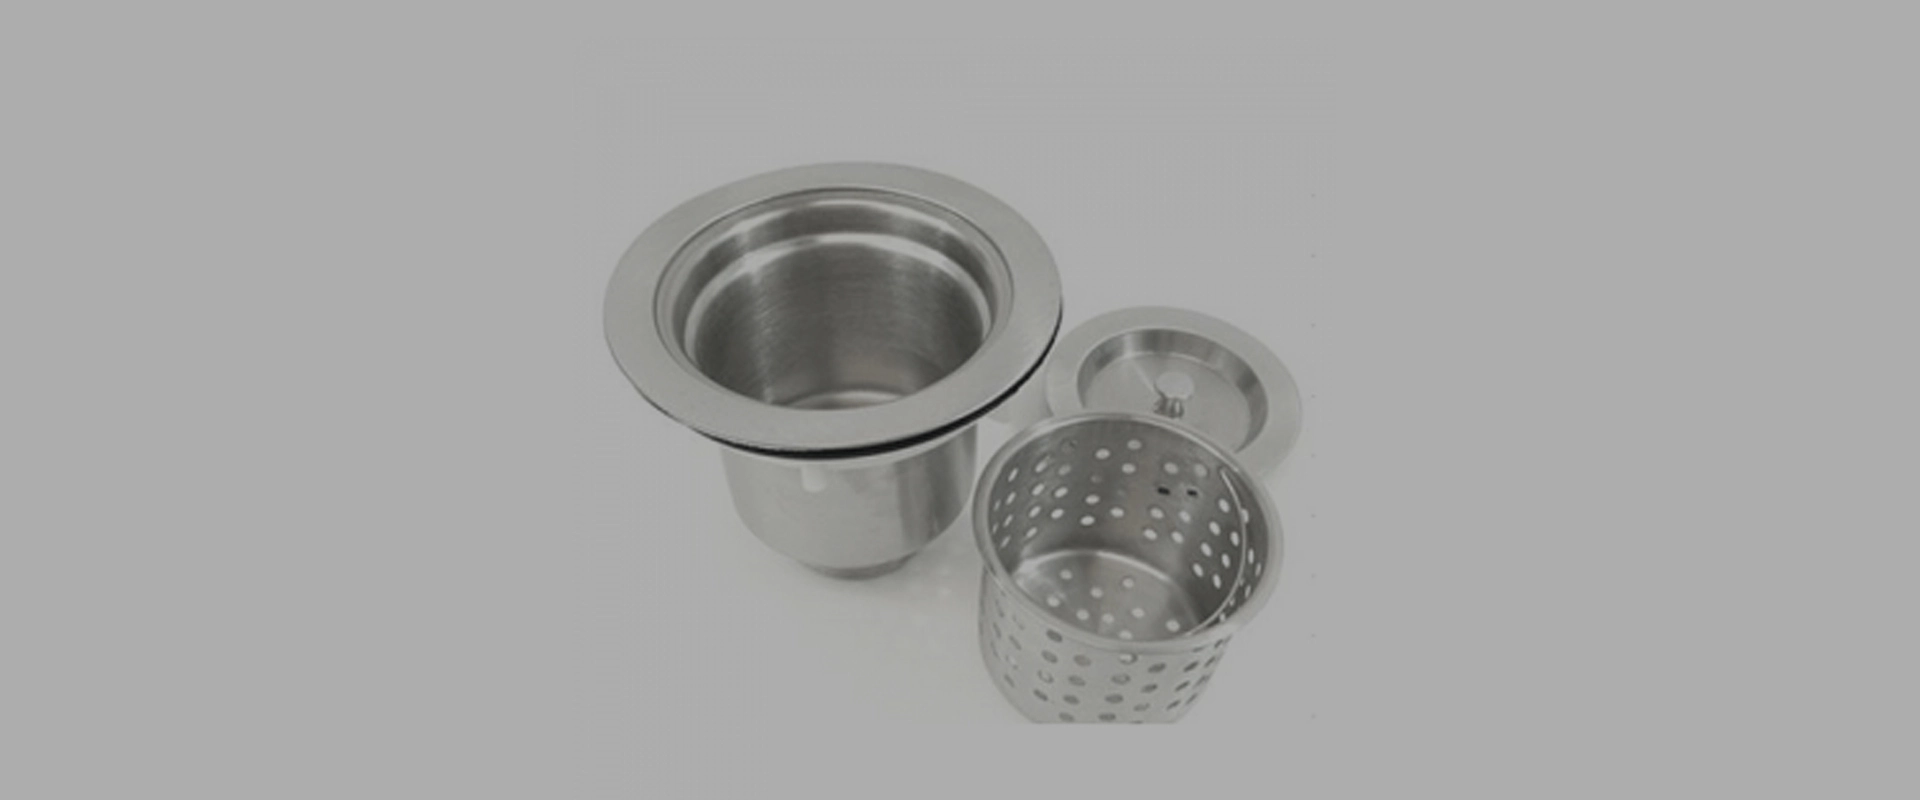 What Is The Purpose Of Stainless Steel Sinks Accessories?